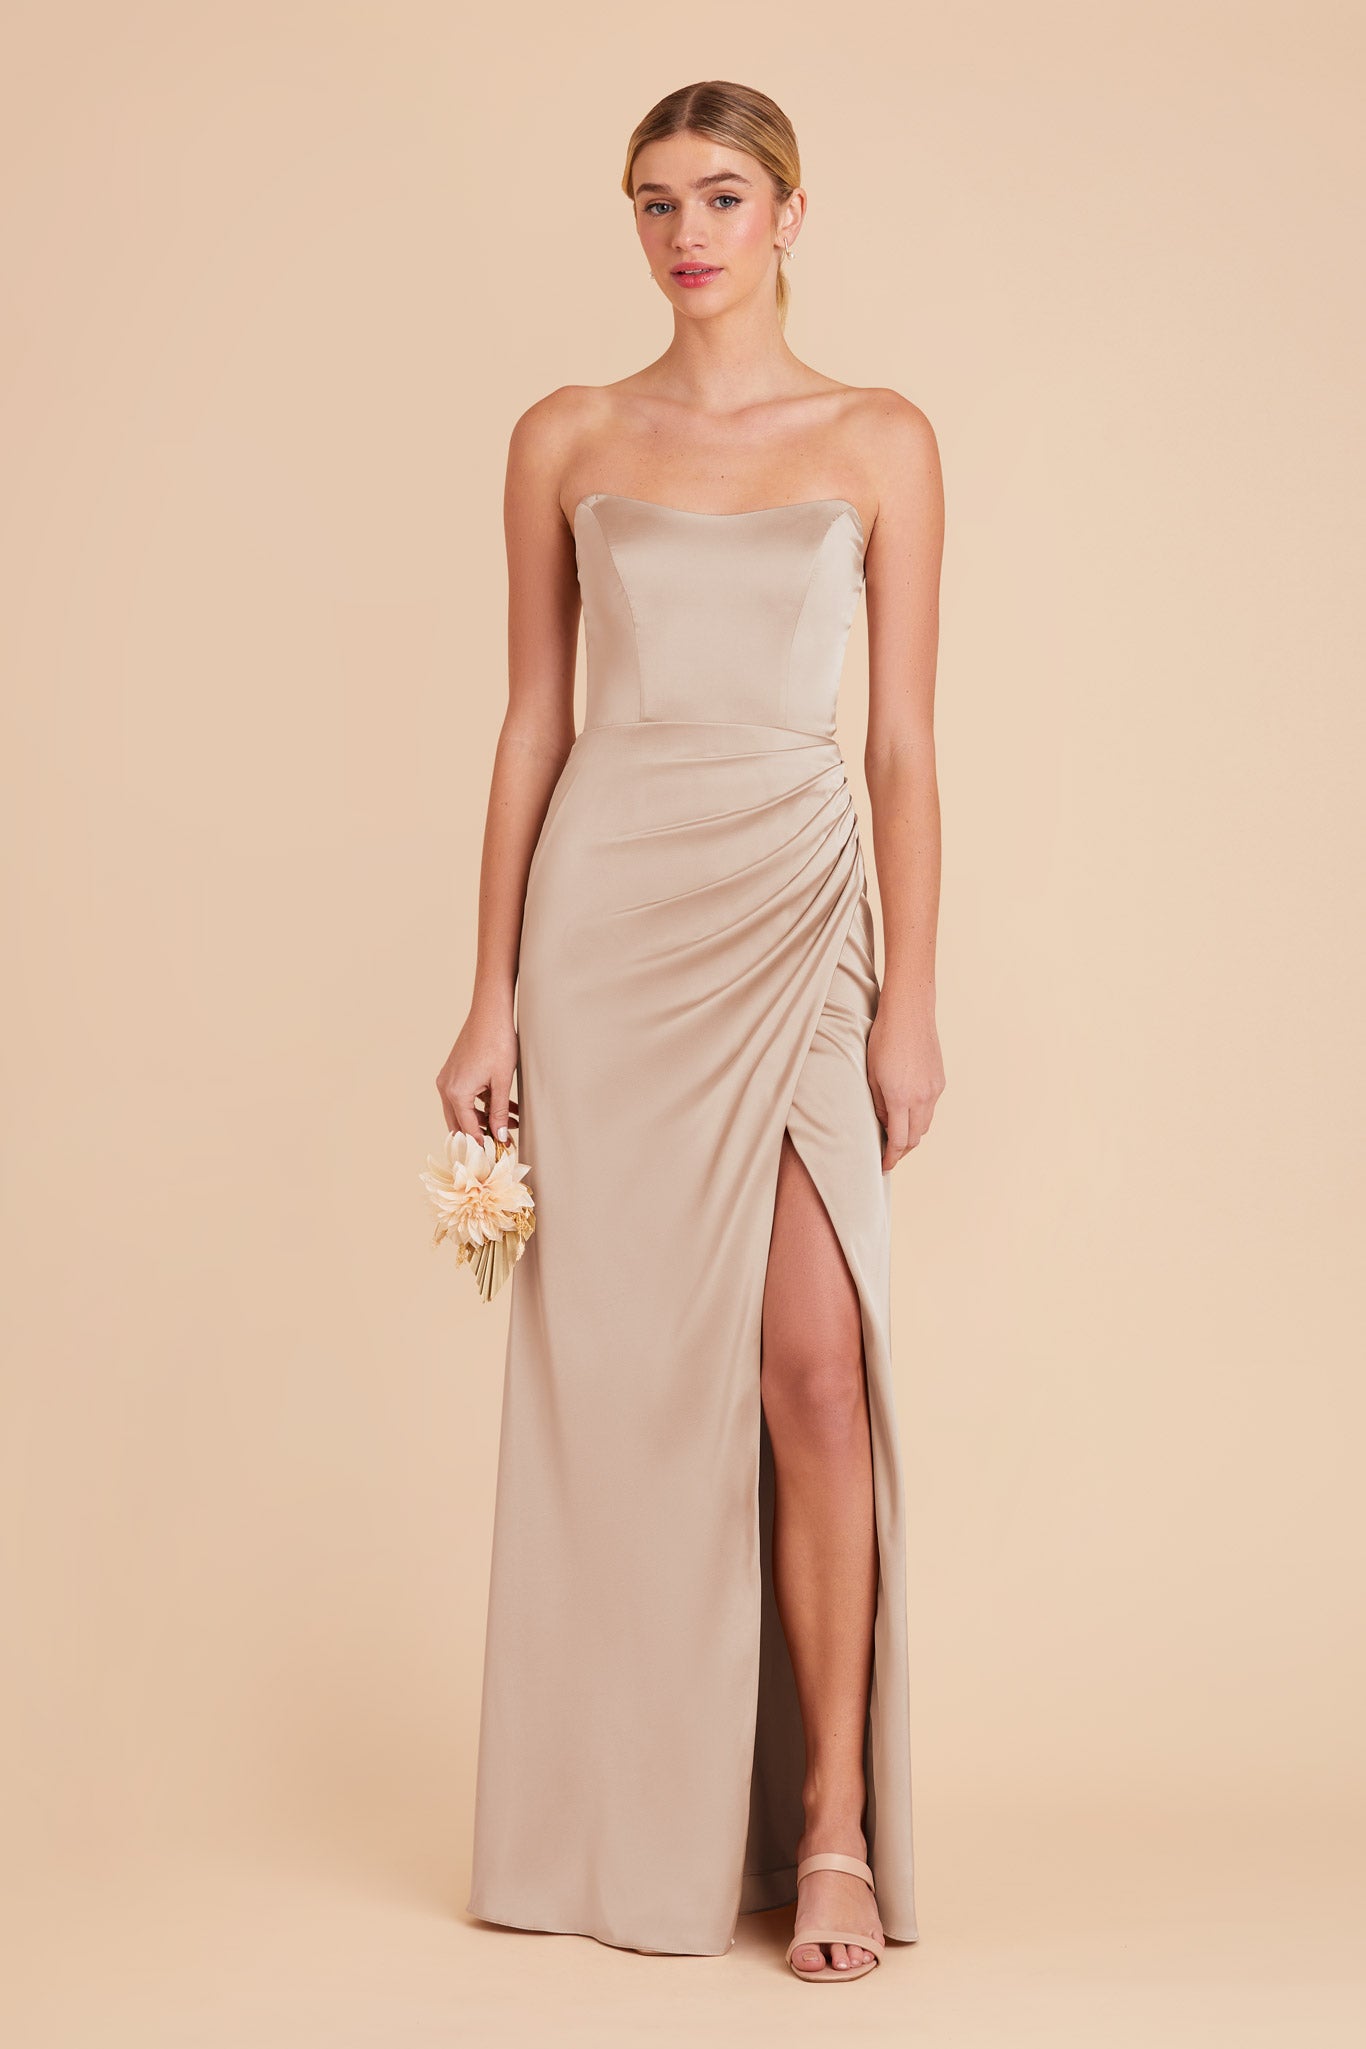 Taupe Anne Matte Satin Dress by Birdy GreyTaupe Anne Matte Satin Dress by Birdy Grey